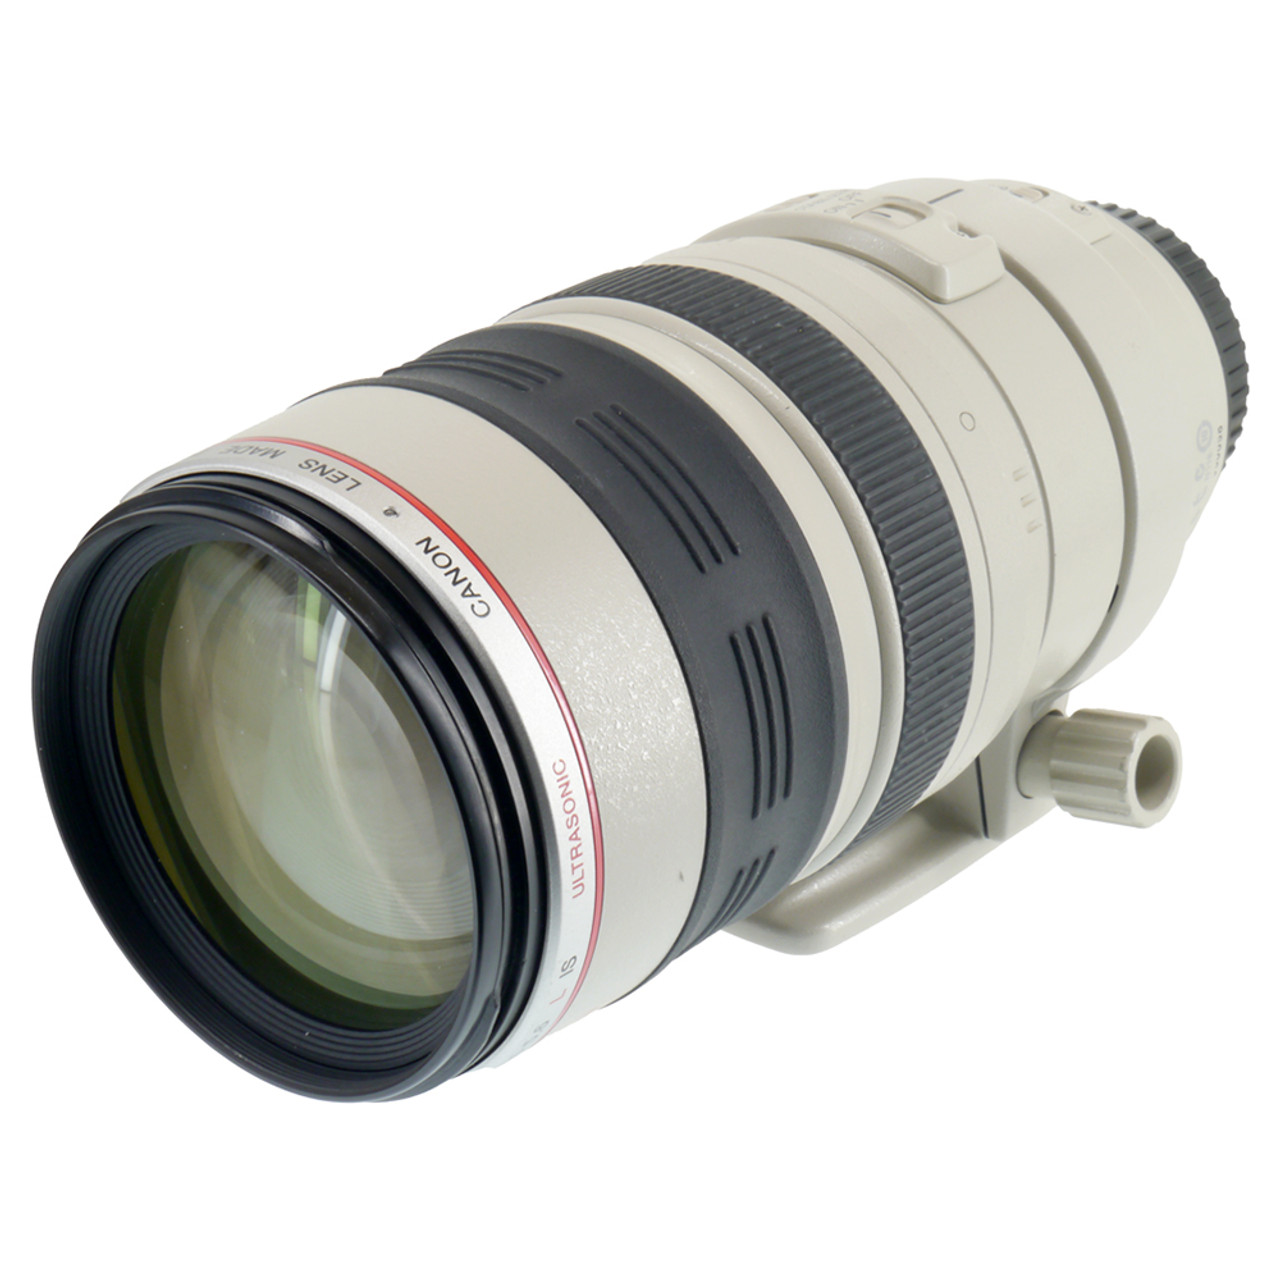 USED CANON EF 100-400MM F4.5-5.6 L IS (761966)